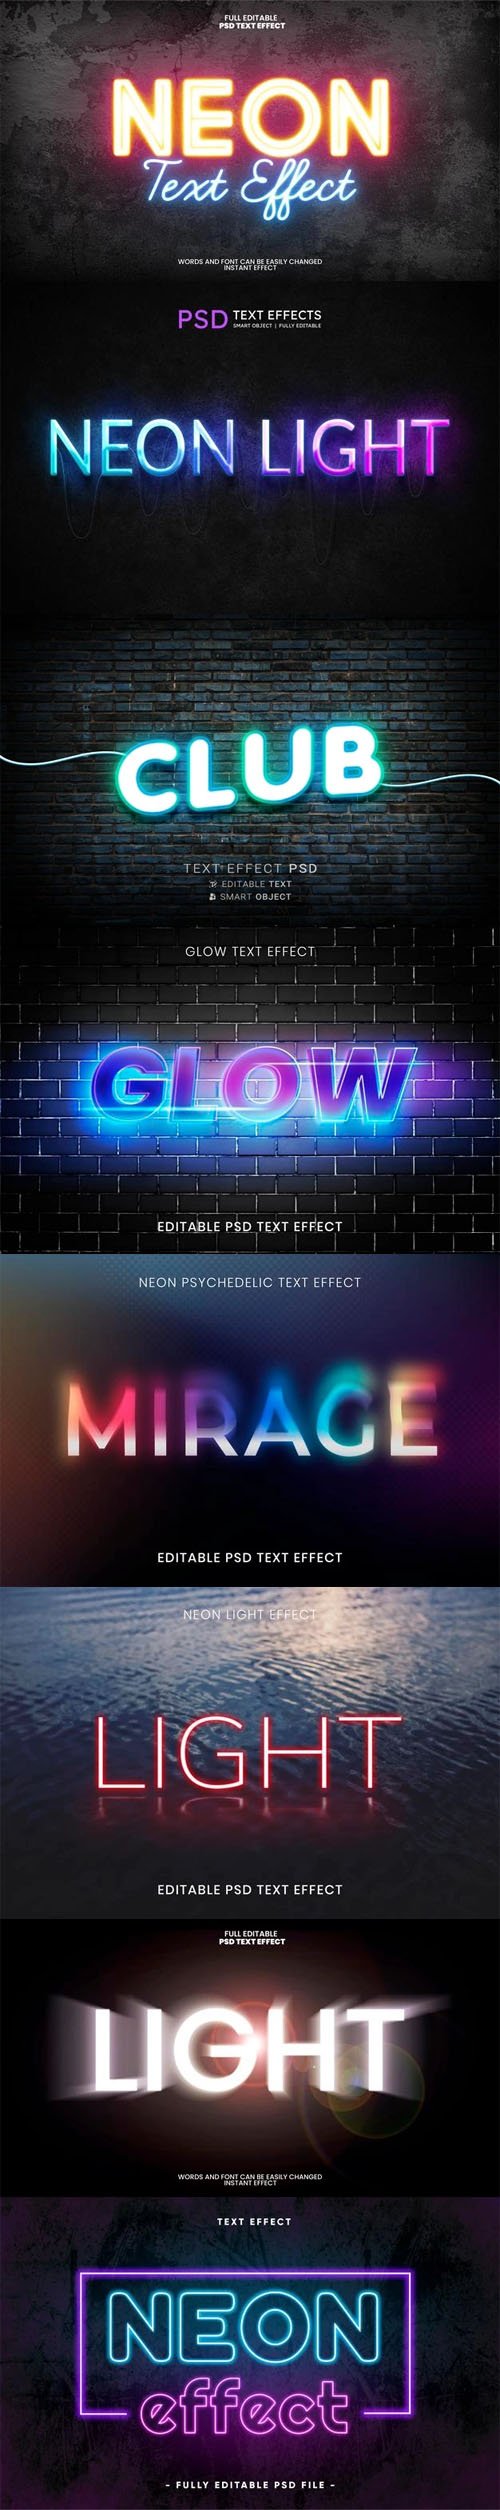 Creative Neon Light Text Effects with Glowing PSD Styles